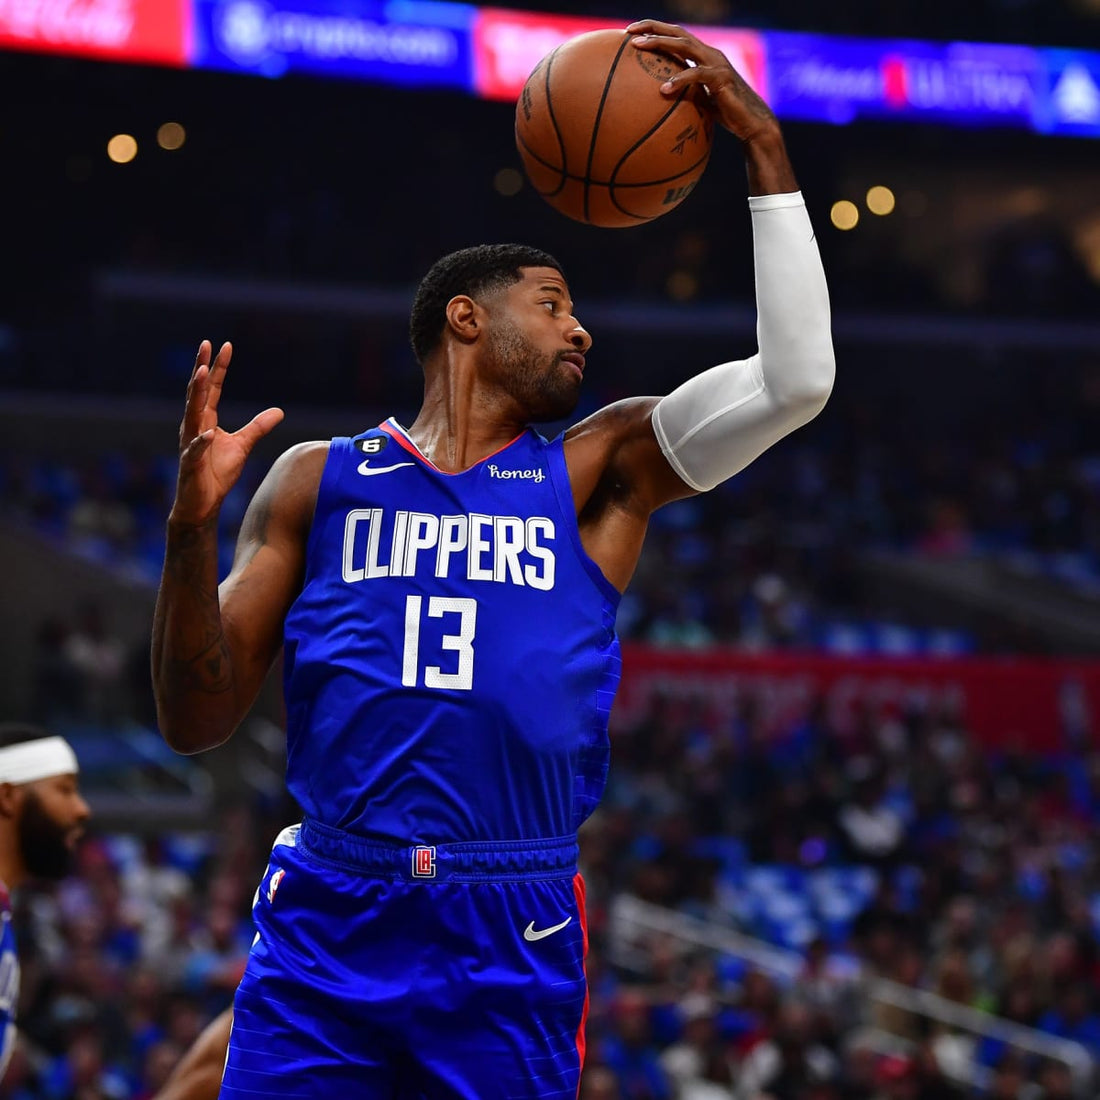 Clippers star Paul George says he's 'very optimistic that our time will come'